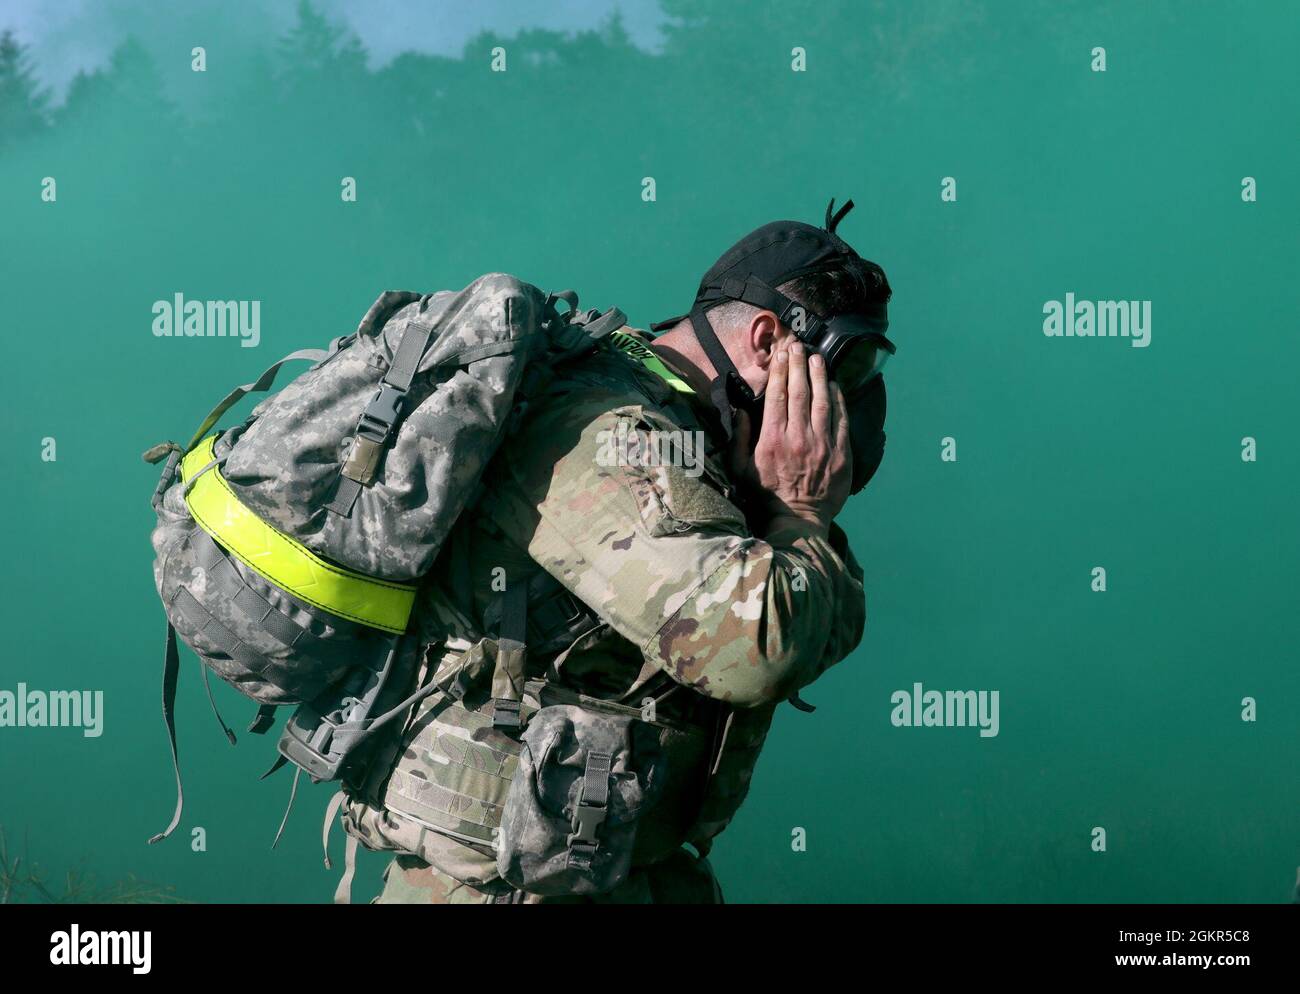 Spc. Colin Hoffmann, assigned to U.S. Army Medical Department Activity-Alaska, clears his protective mask during a simulated gas attack, Regional Health Command-Pacific Best Leader Competition, Joint Base Lewis-McChord, Wash., June 17, 2021. Both are assigned to U.S> Army Medical Department Activity-Alaska. The Best Leader Competition promotes esprit de corps across the Army, while recognizing Soldiers who demonstrate the Army Values and embody the Warrior Ethos. The competition recognizes those Soldiers who possess superb military bearing and communication skills, in-depth knowledge of milita Stock Photo